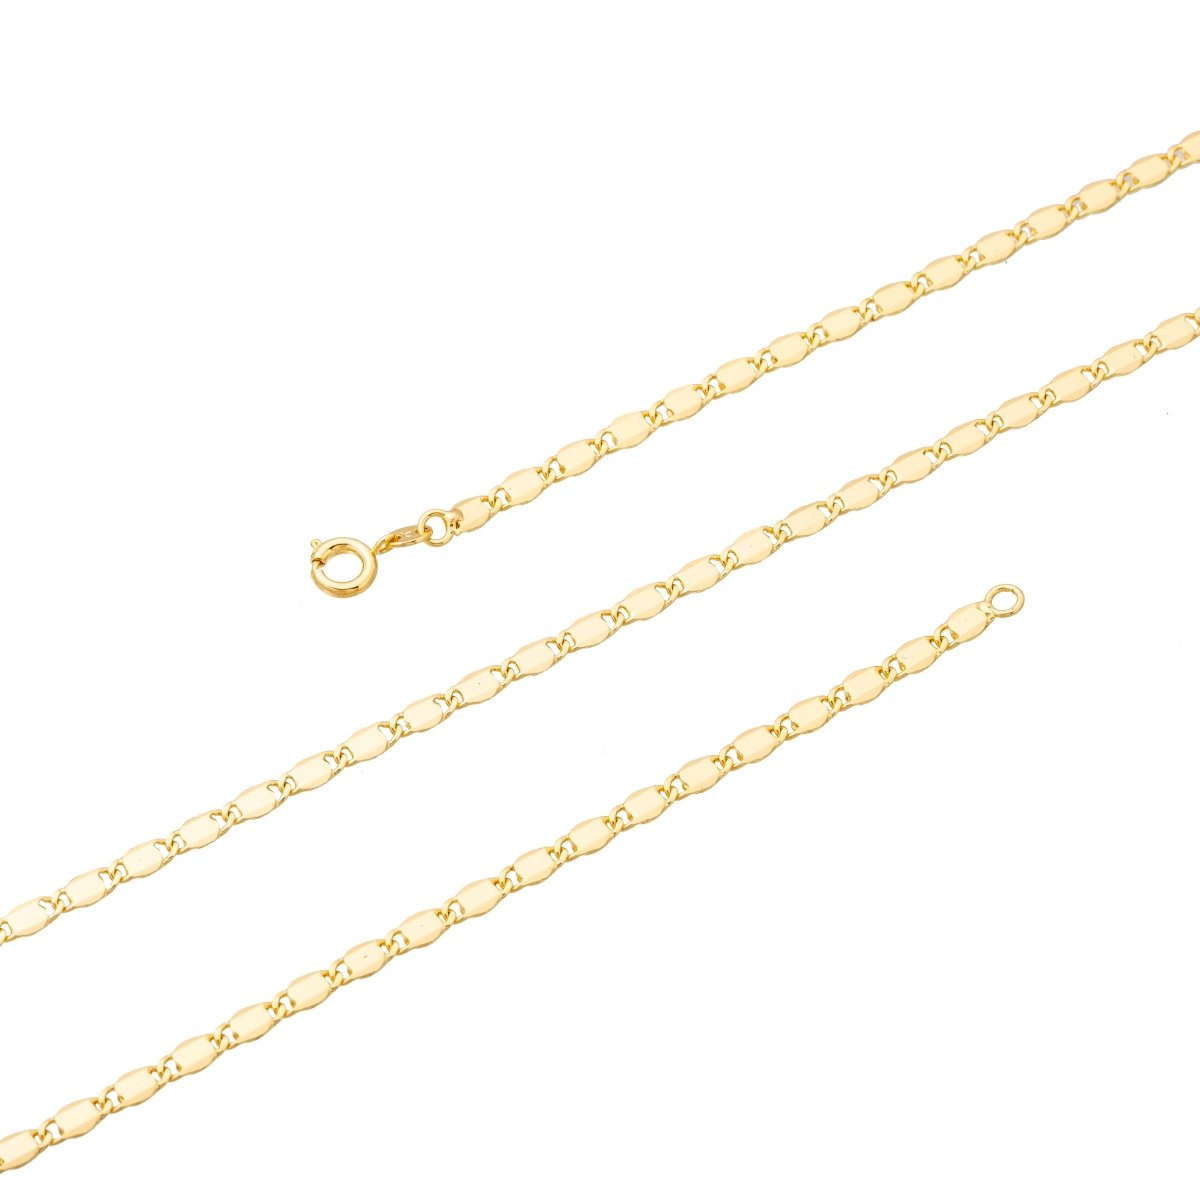 24K Gold Filled Scroll Necklace Chain, 23.5 inch Designed Finished Chain Necklace For Jewelry Making, 3.1mm Width Designed Necklace w/ Spring Ring | CN-169 Clearance Pricing - DLUXCA